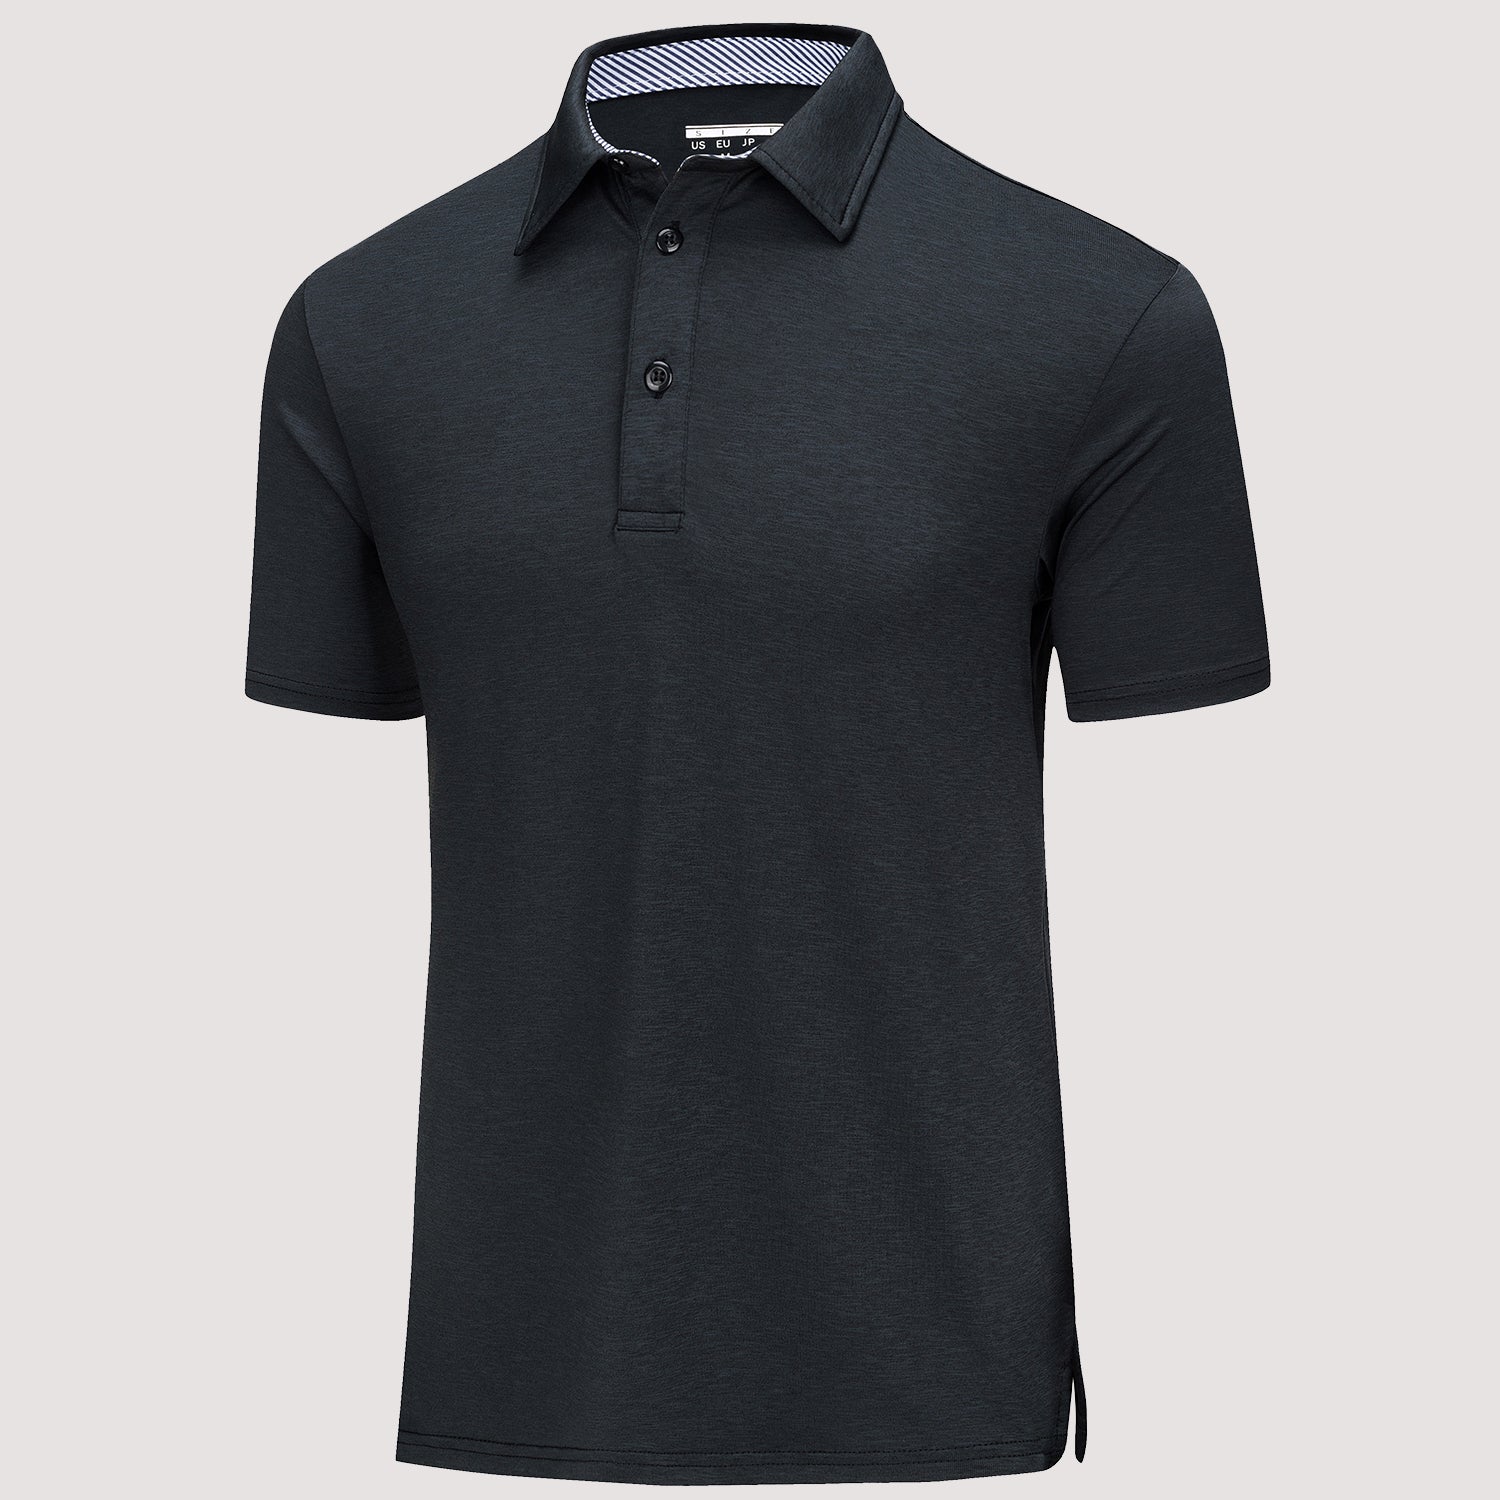 Golf Shirts: Best Golf Polo Shirts for 2022